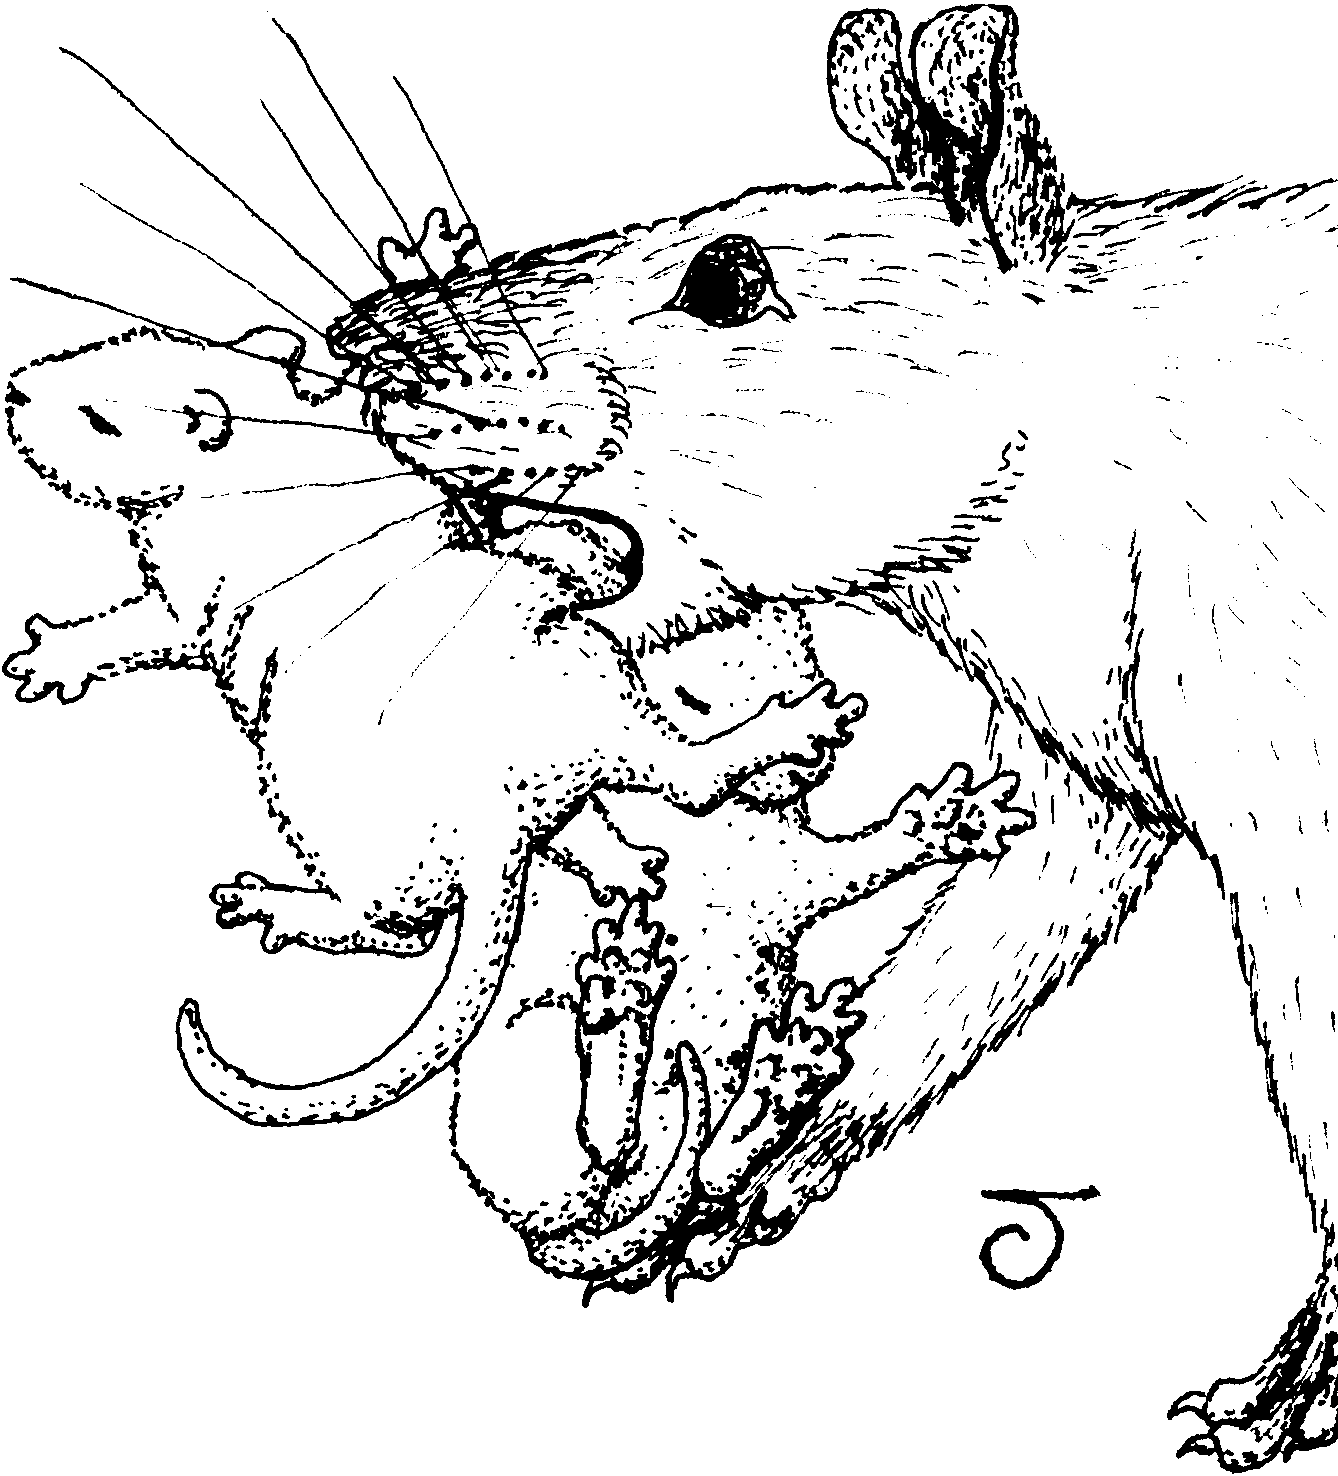 Caricature of head and shoulders of doe rat trotting along carrying two babies awkwardly by odd folds of skin